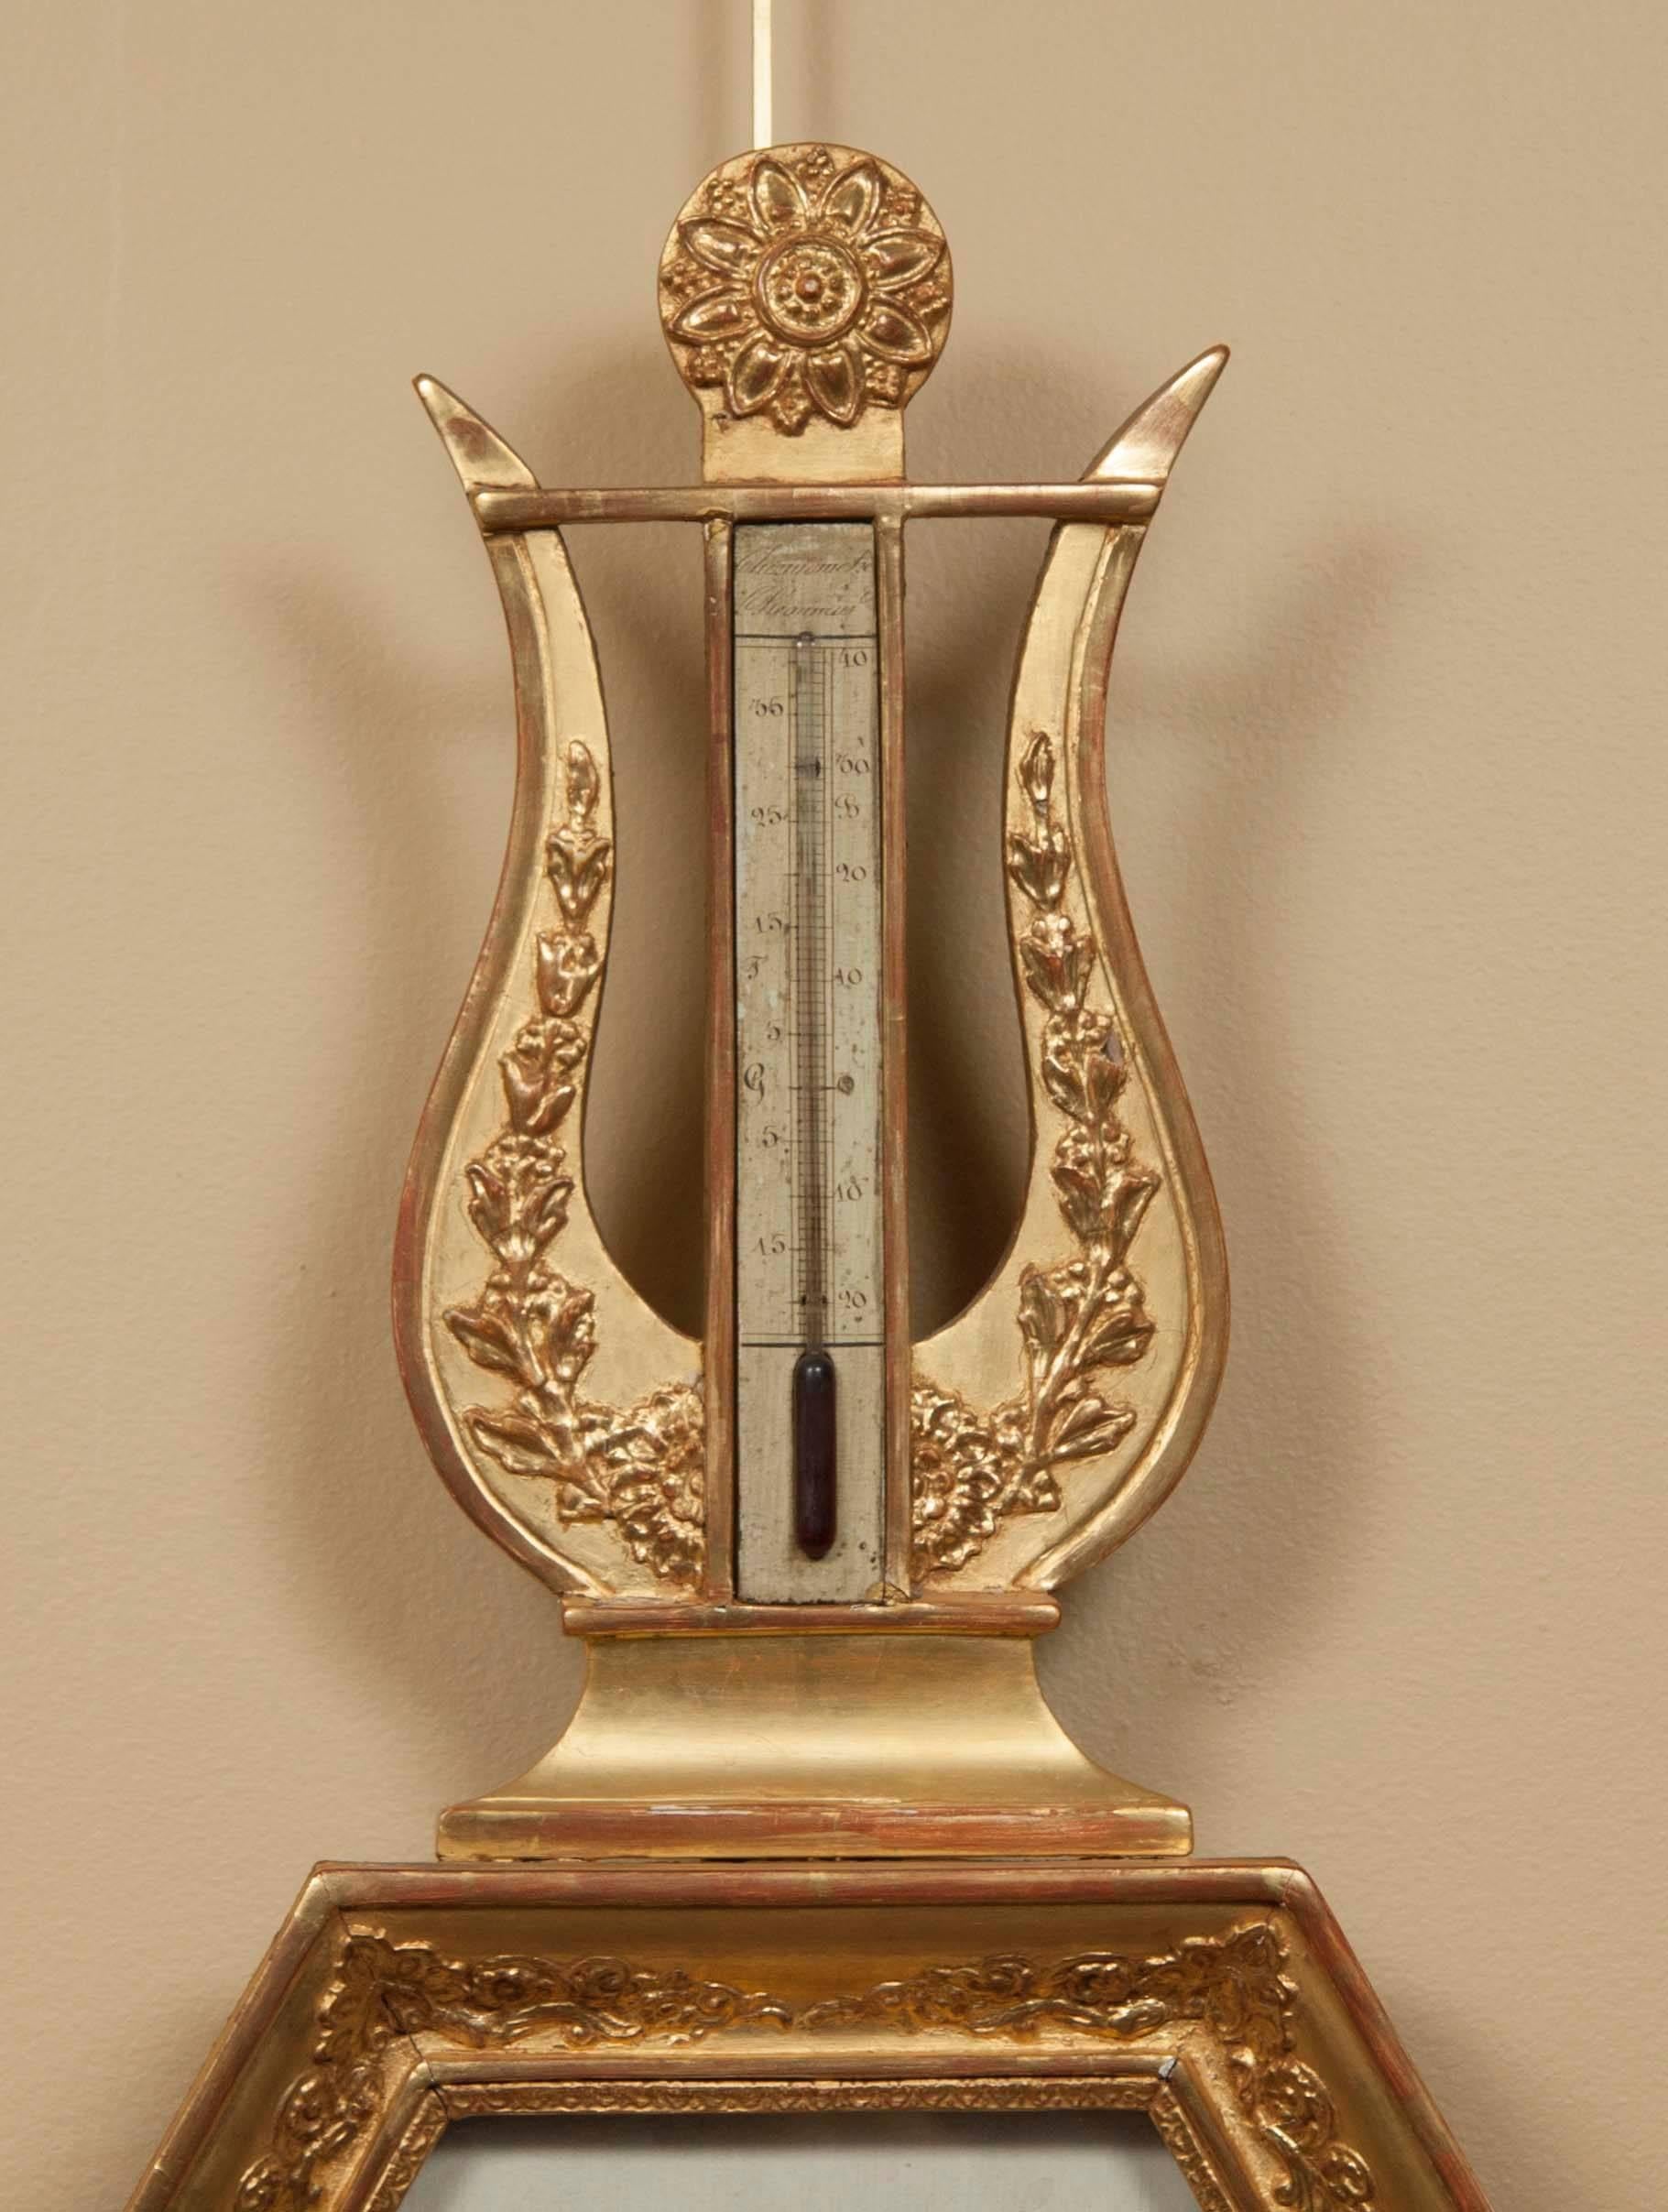 Typical form with lyre form top section with central thermometer, the central hexagonal frame with grisaille painted dial.